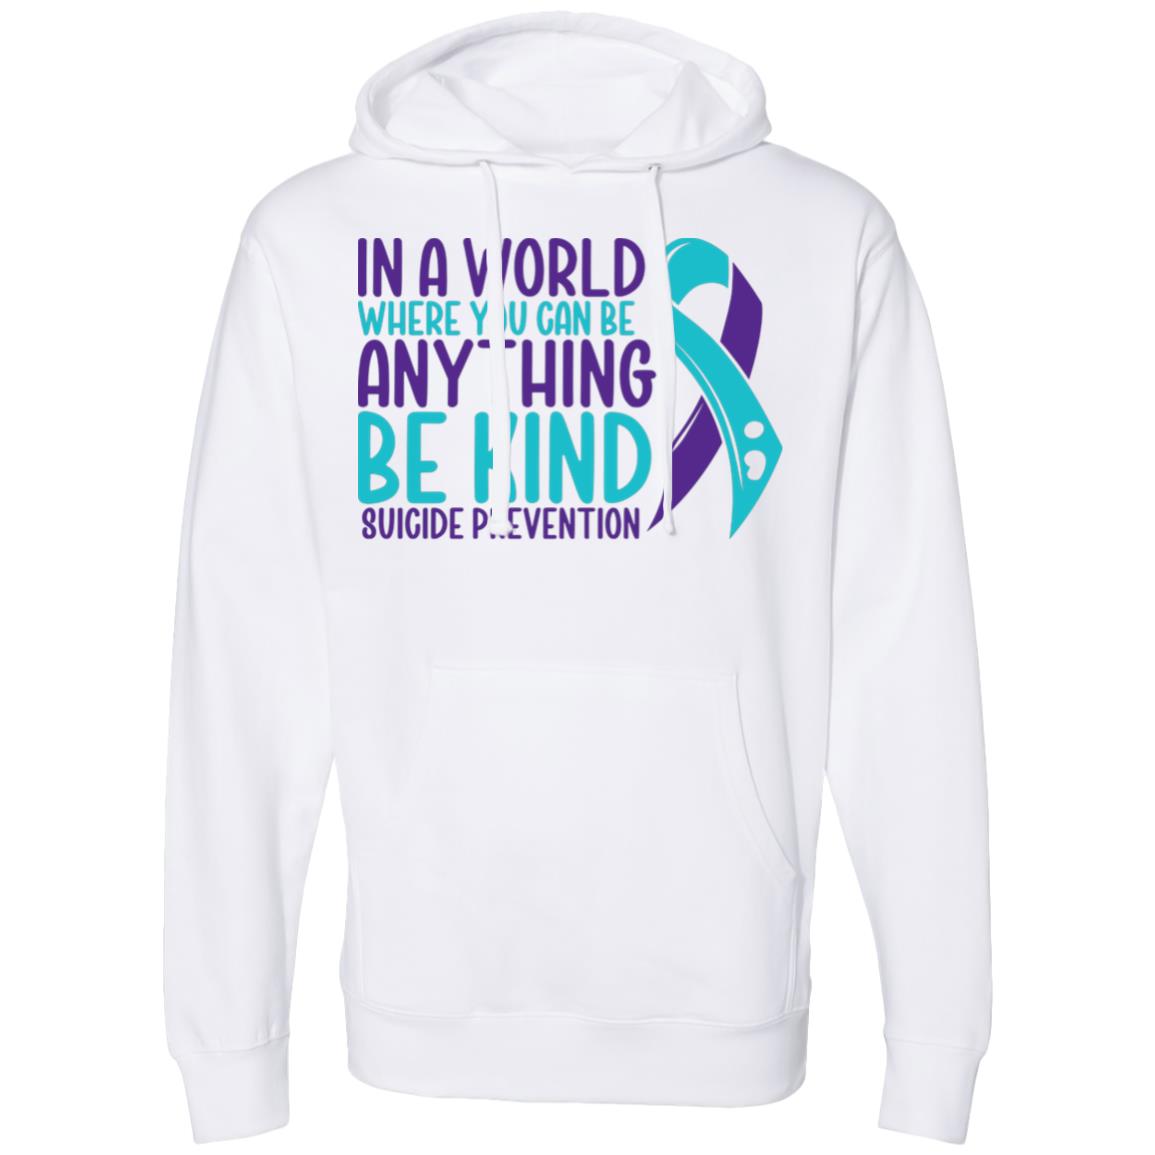 Be Kind Suicide Prevention - Hooded Sweatshirt